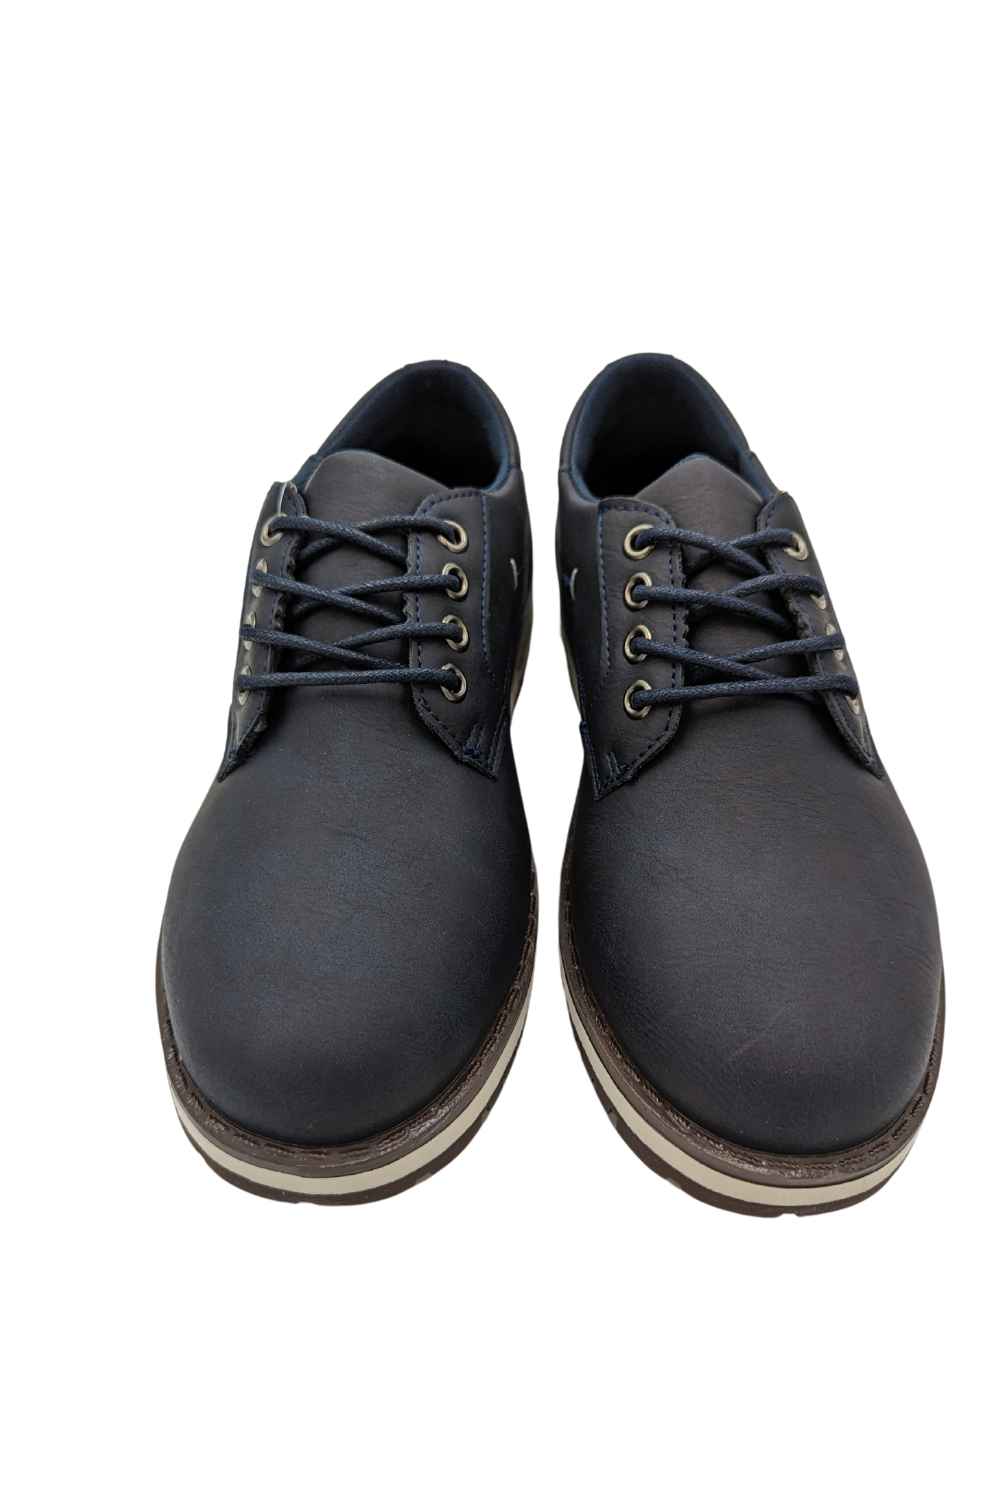 Leon Boys Navy Shoes-Front view